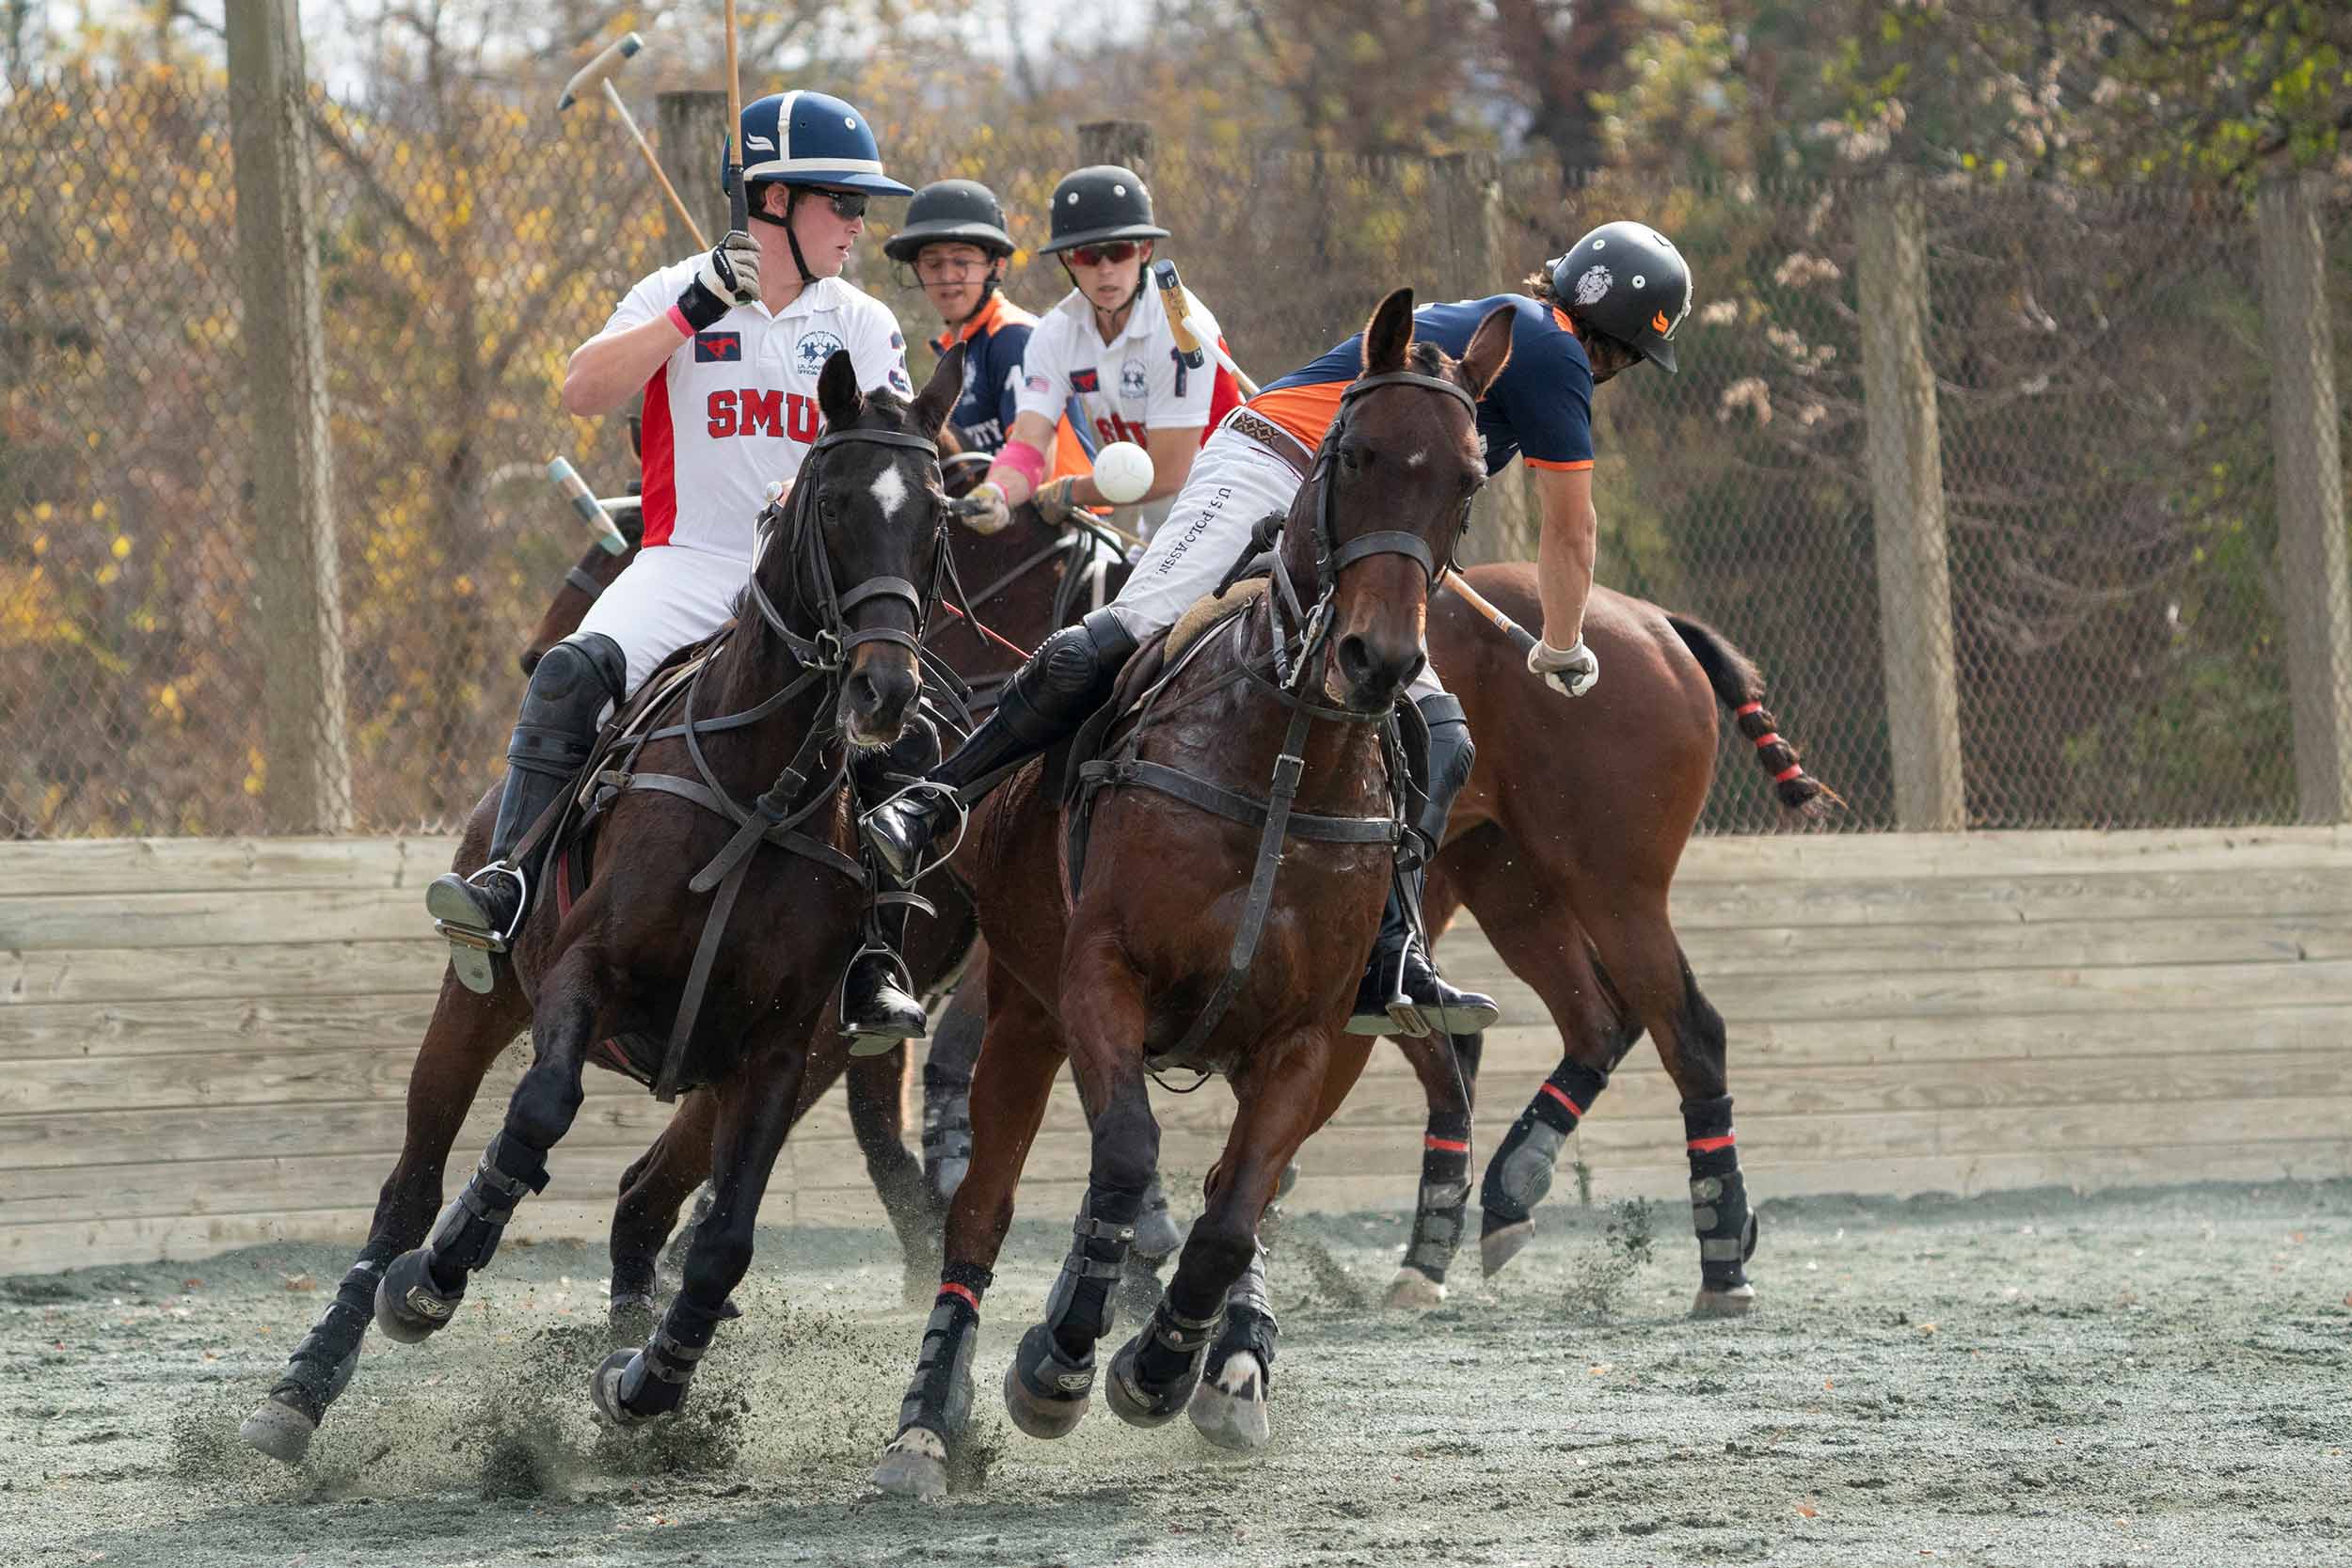 four horses and polo players going after a ball